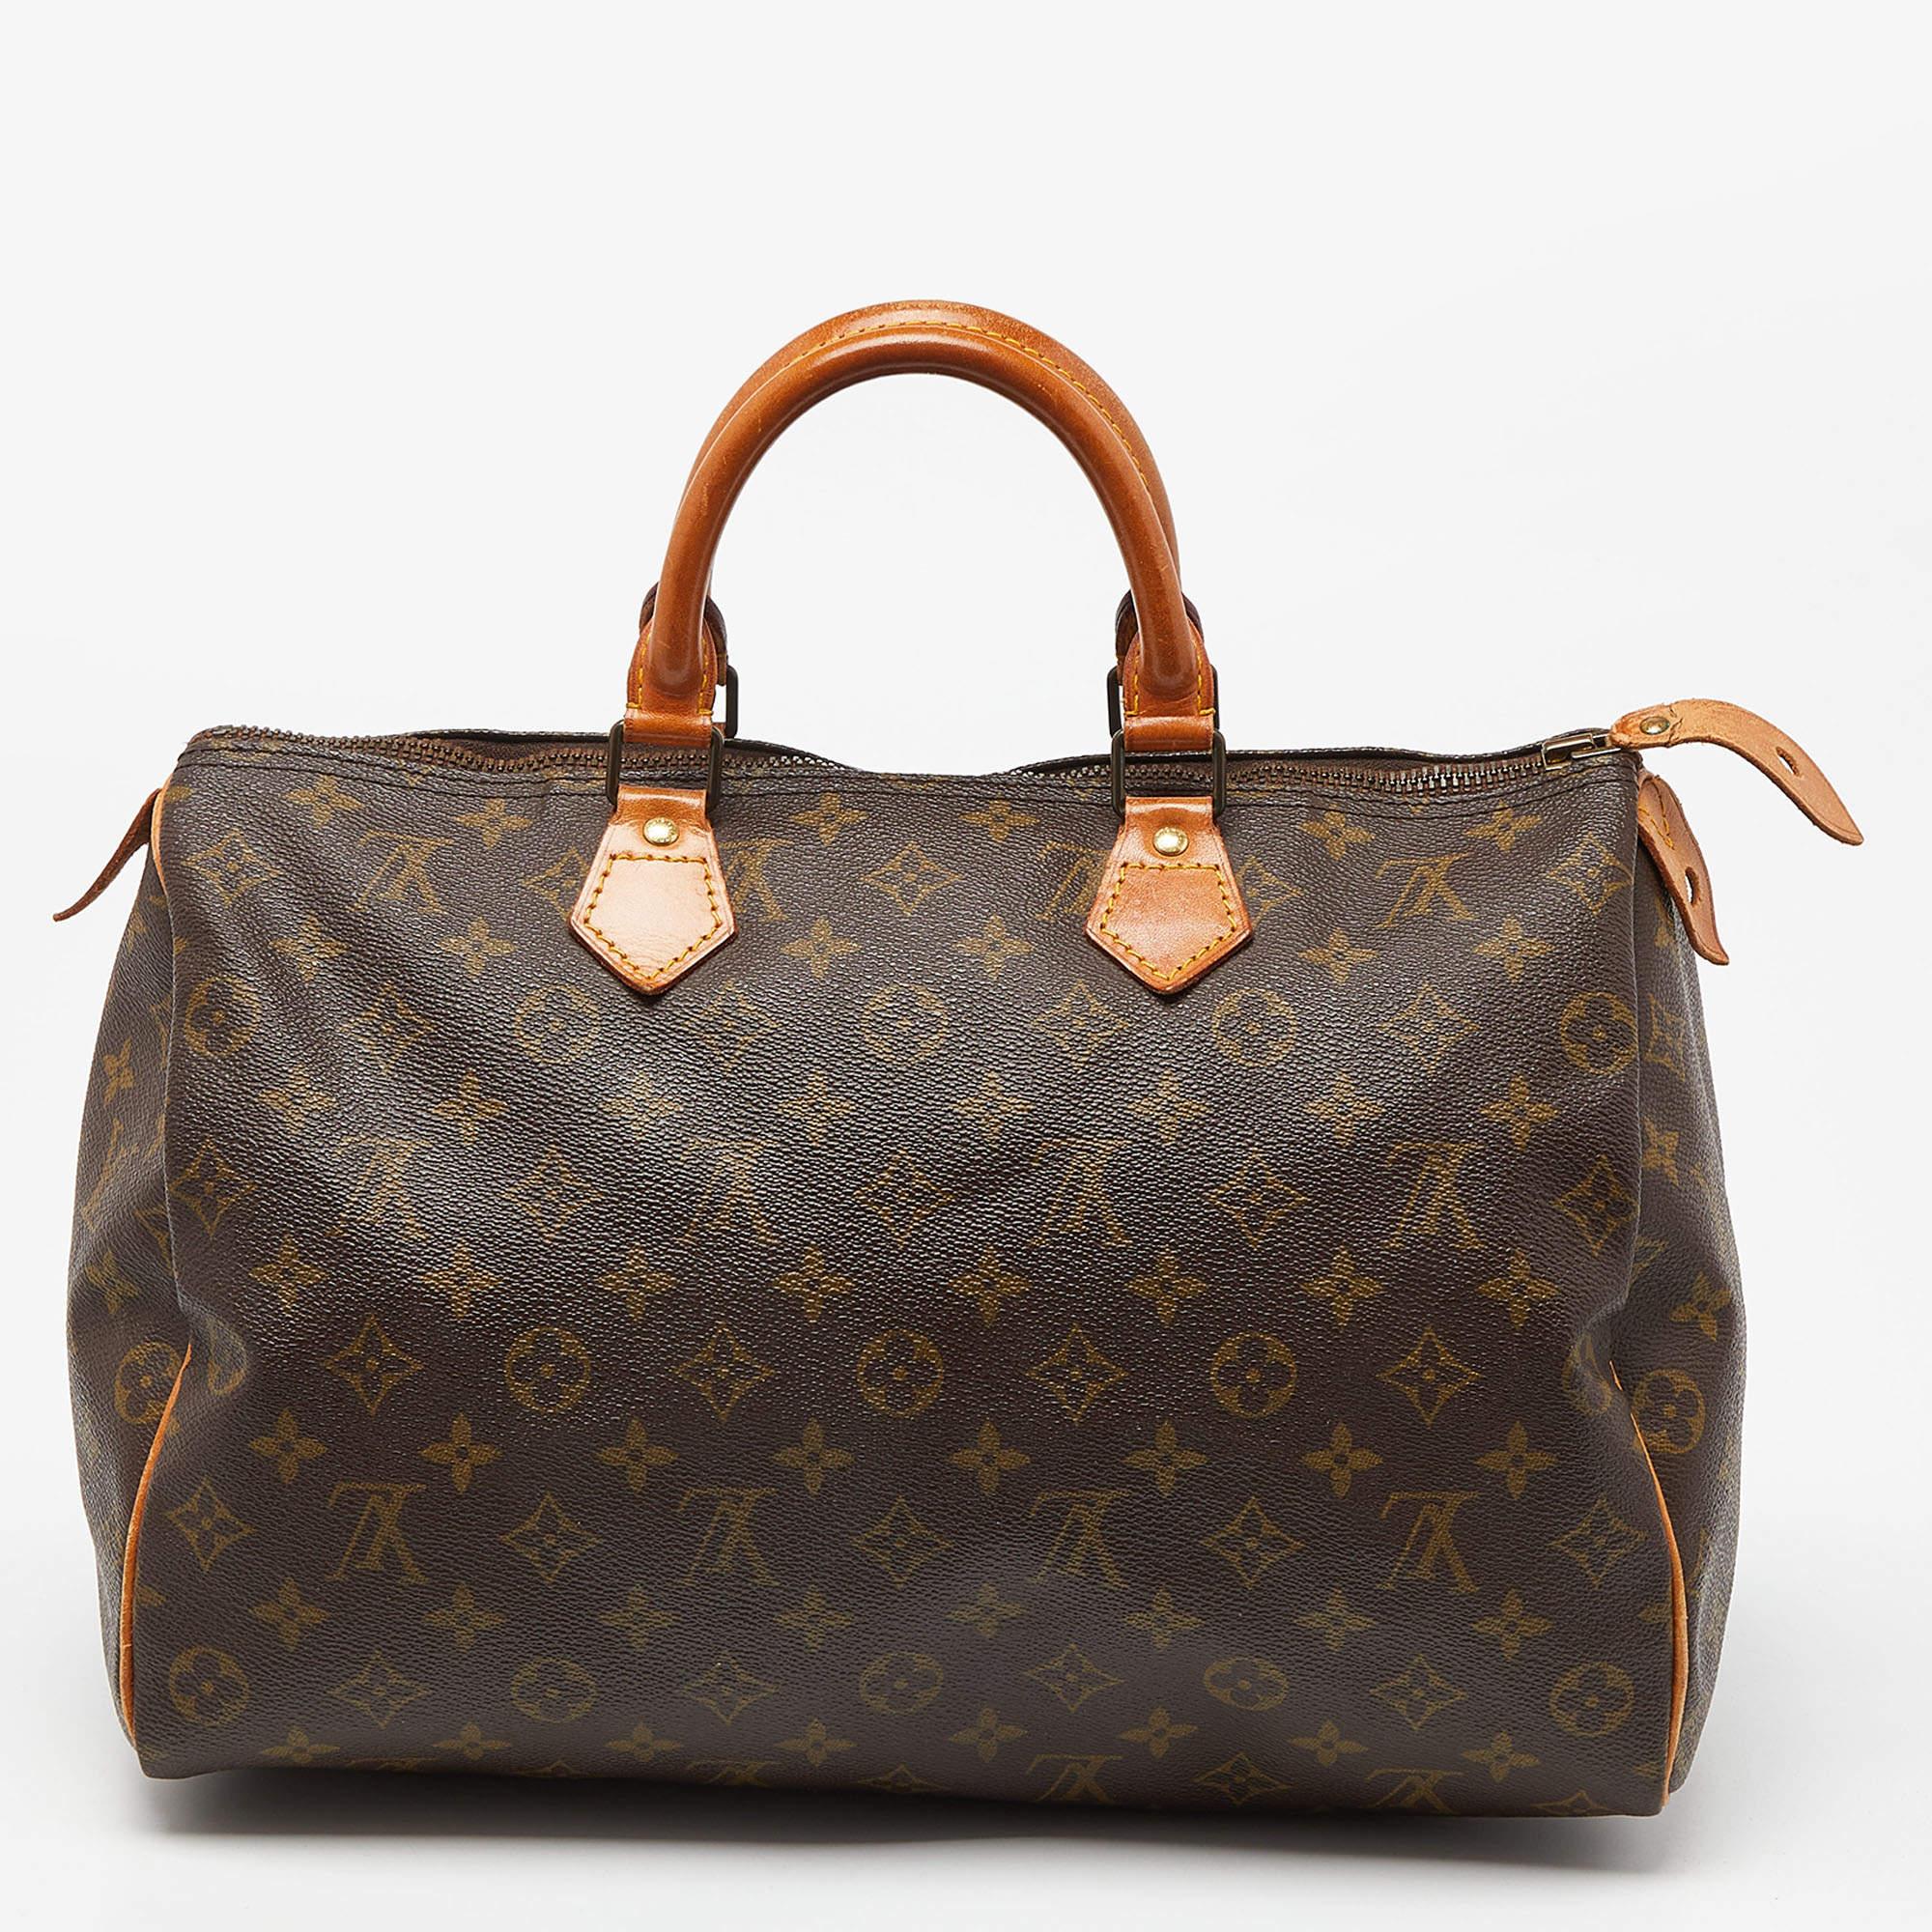 Titled as one of the greatest handbags in the history of luxury fashion, the Speedy from Louis Vuitton was first created for everyday use as a smaller version of their famous Keepall bag. This Speedy comes crafted from Monogram canvas with two